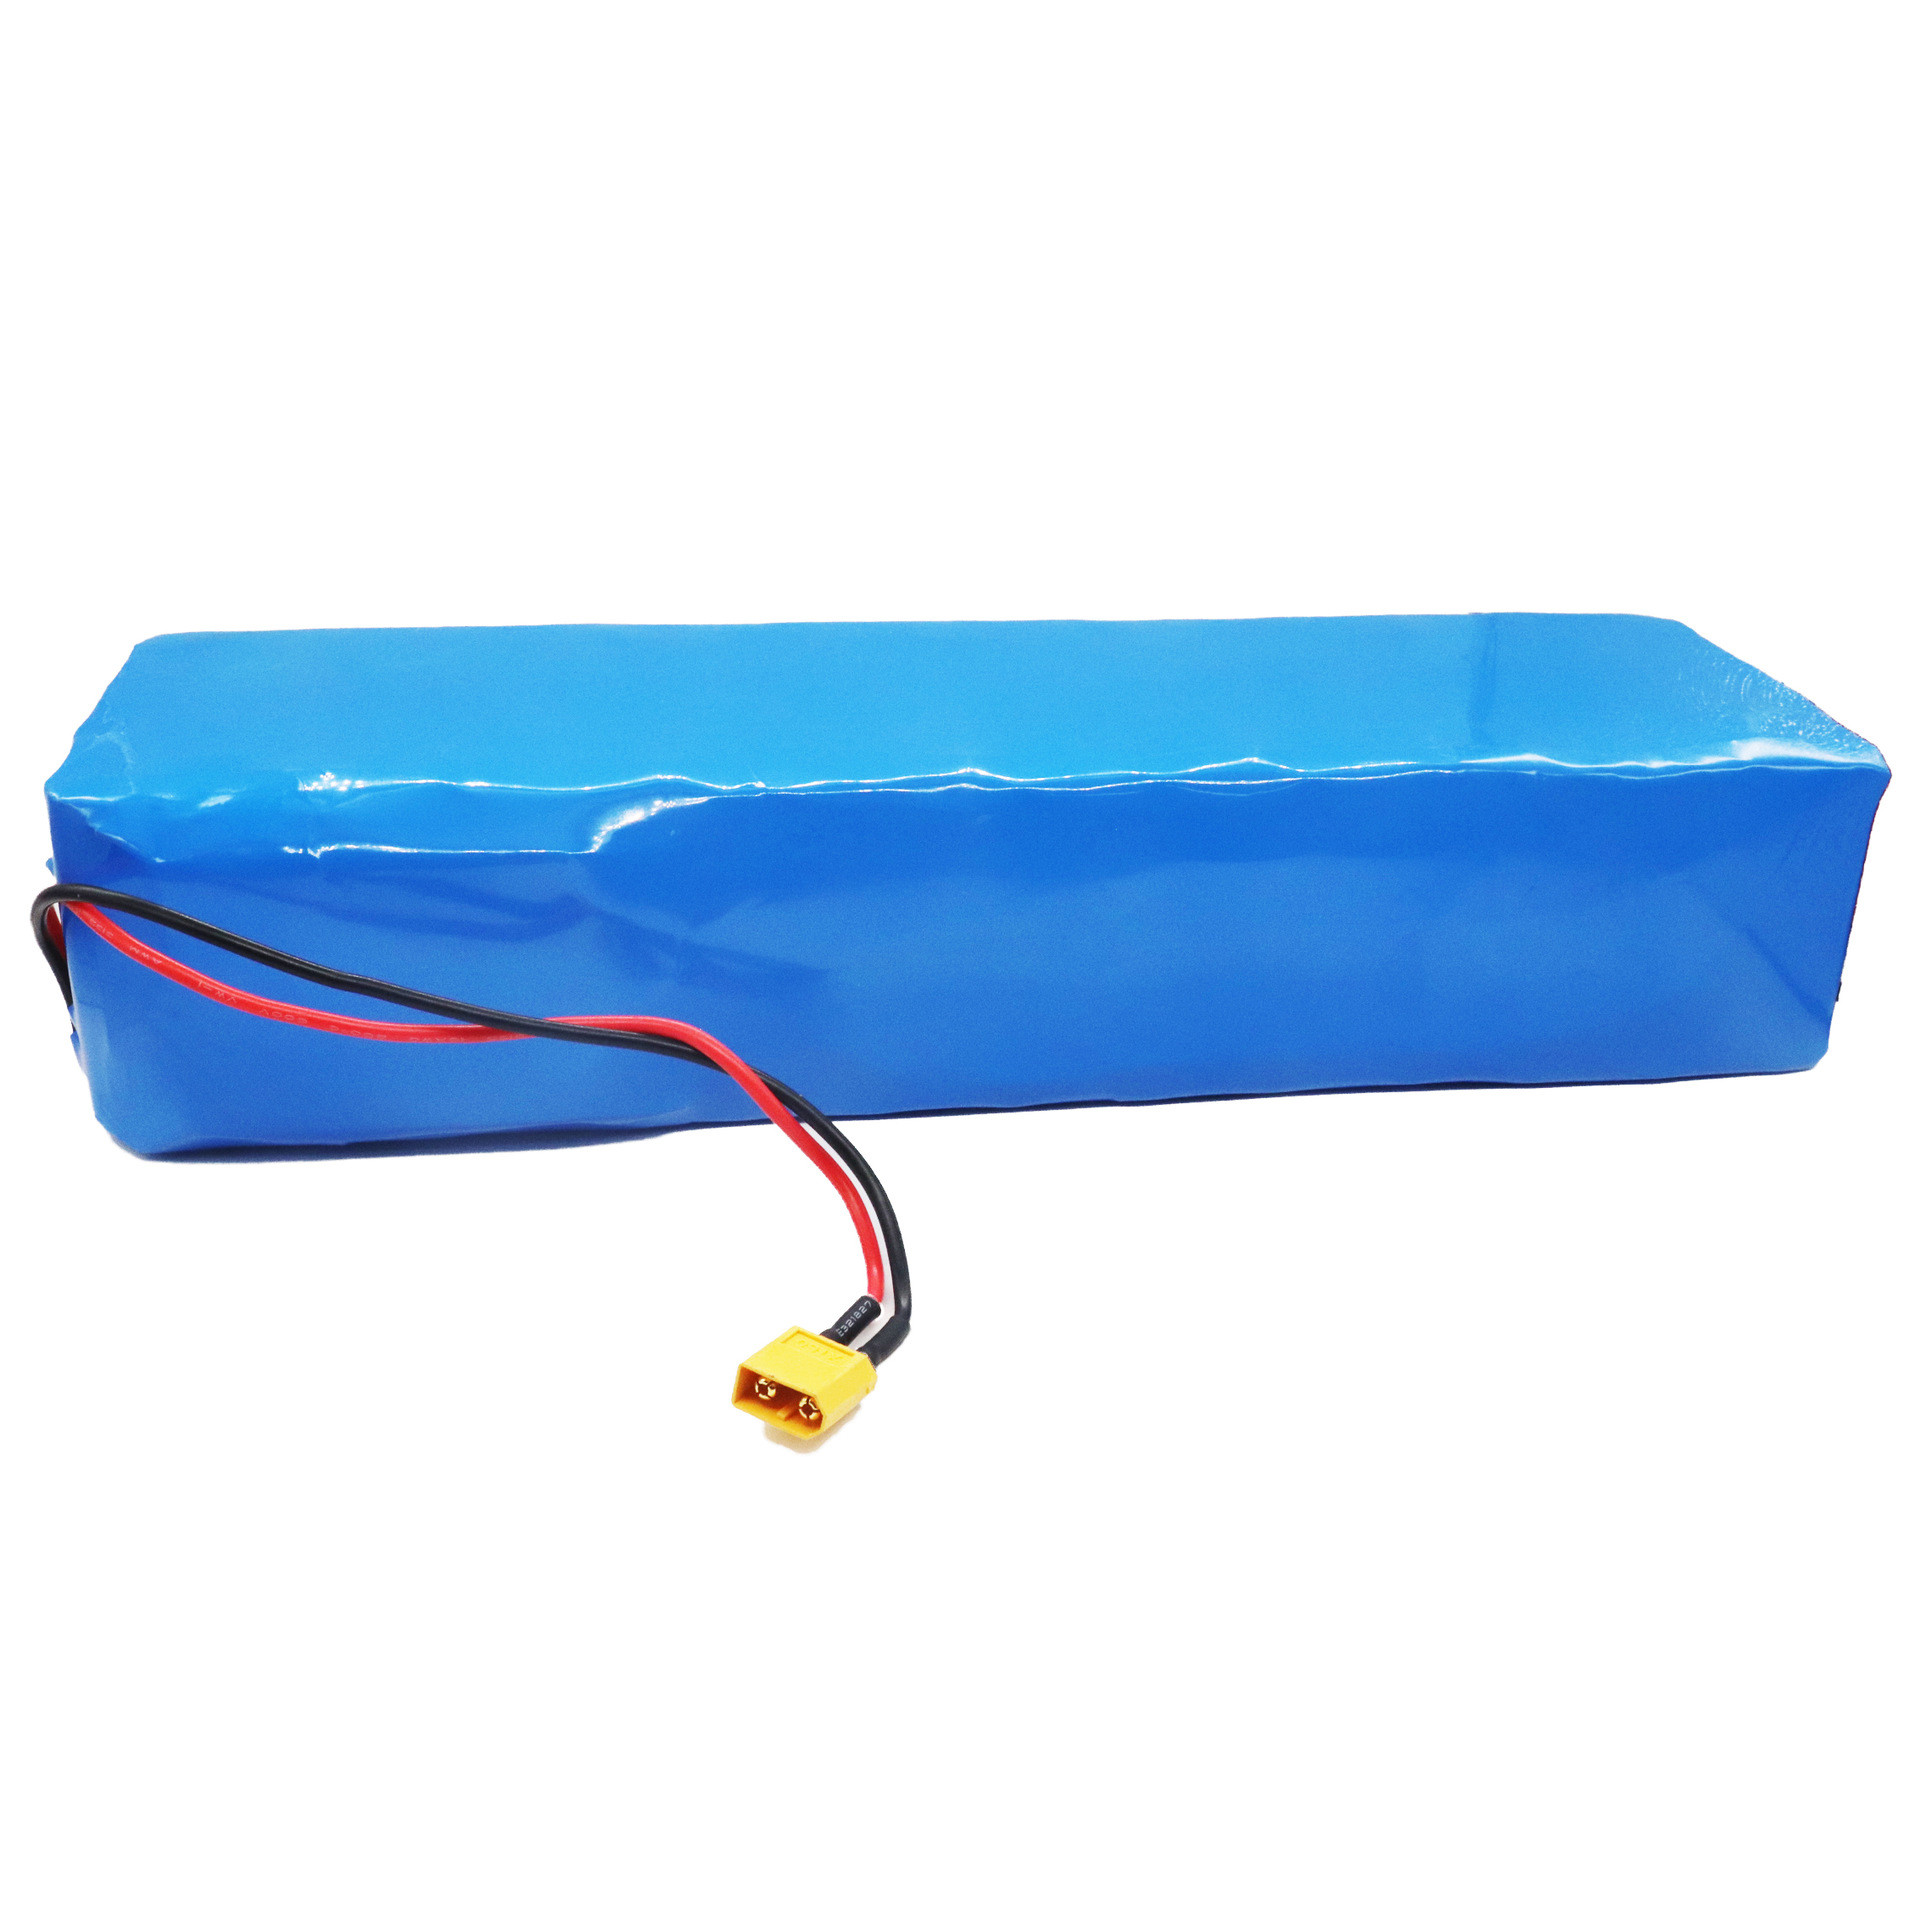  30Ah 60V Lithium Battery Custom Battery Solutions For Scooter Manufactures